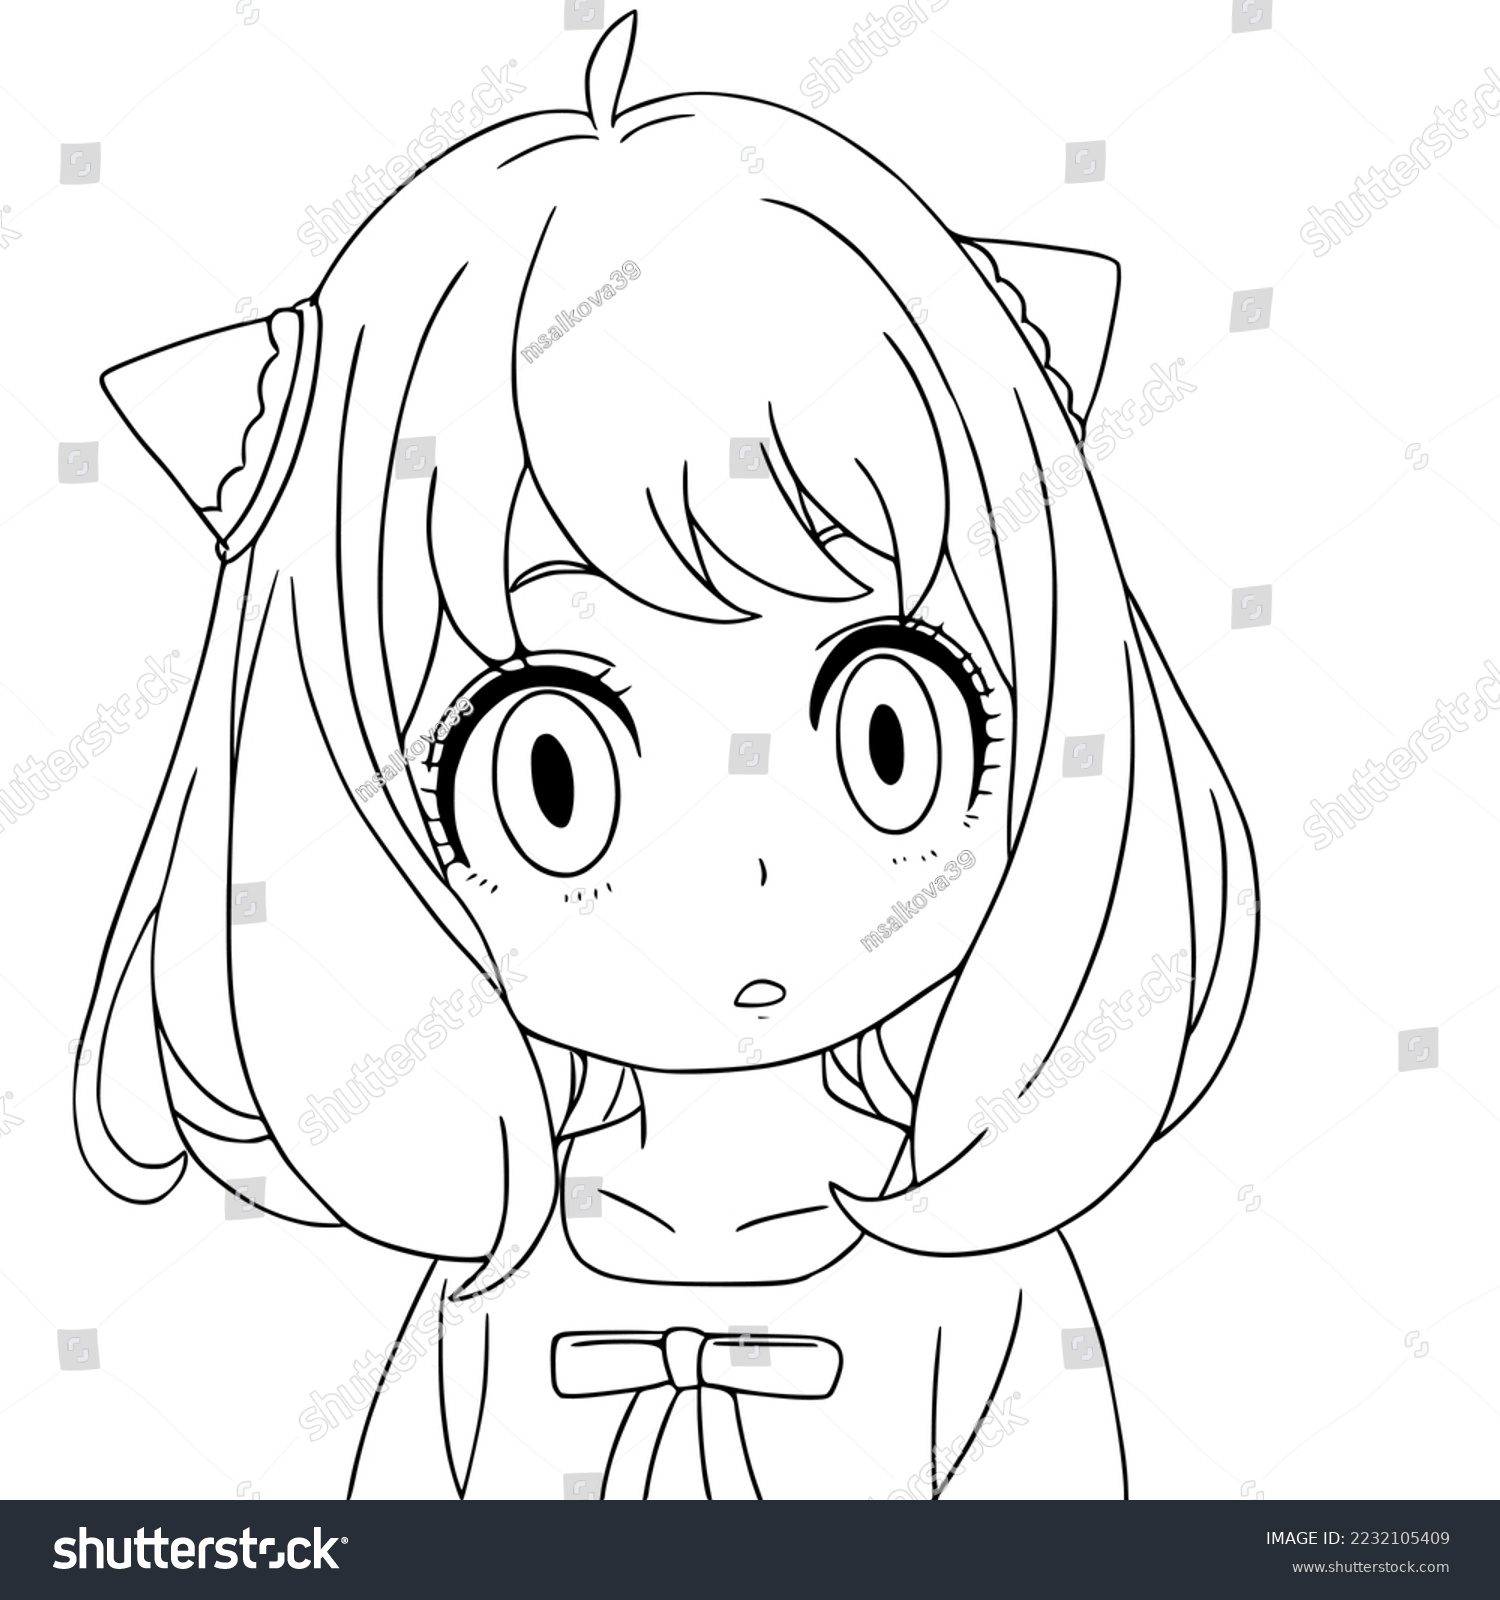 SVG of Surprised girl with wide open eyes, the girl has ears and puffy hair, a dress with a bow, a sketch, a doodle, a coloring book svg